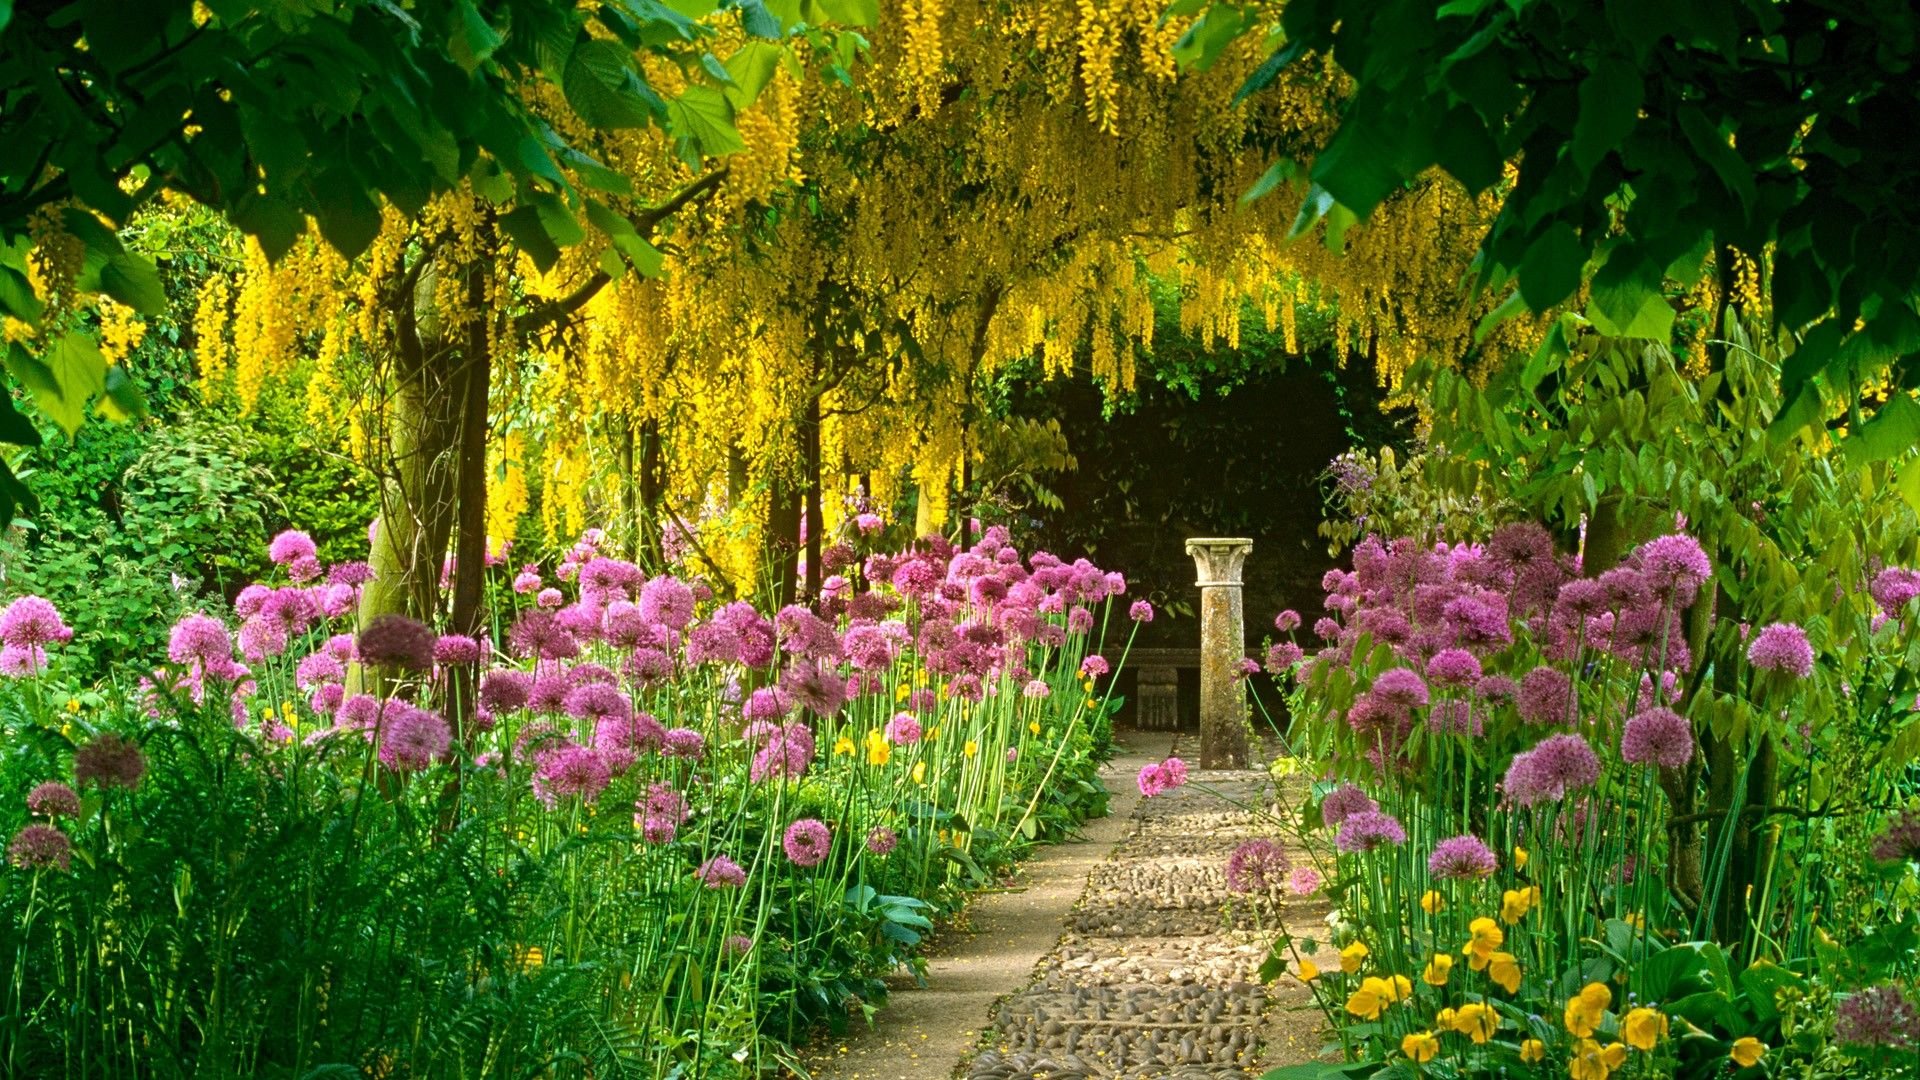 Lovely 3D Garden White Flowers Arched Pathway Design Wallpaper Mural –  beddingandbeyond.club